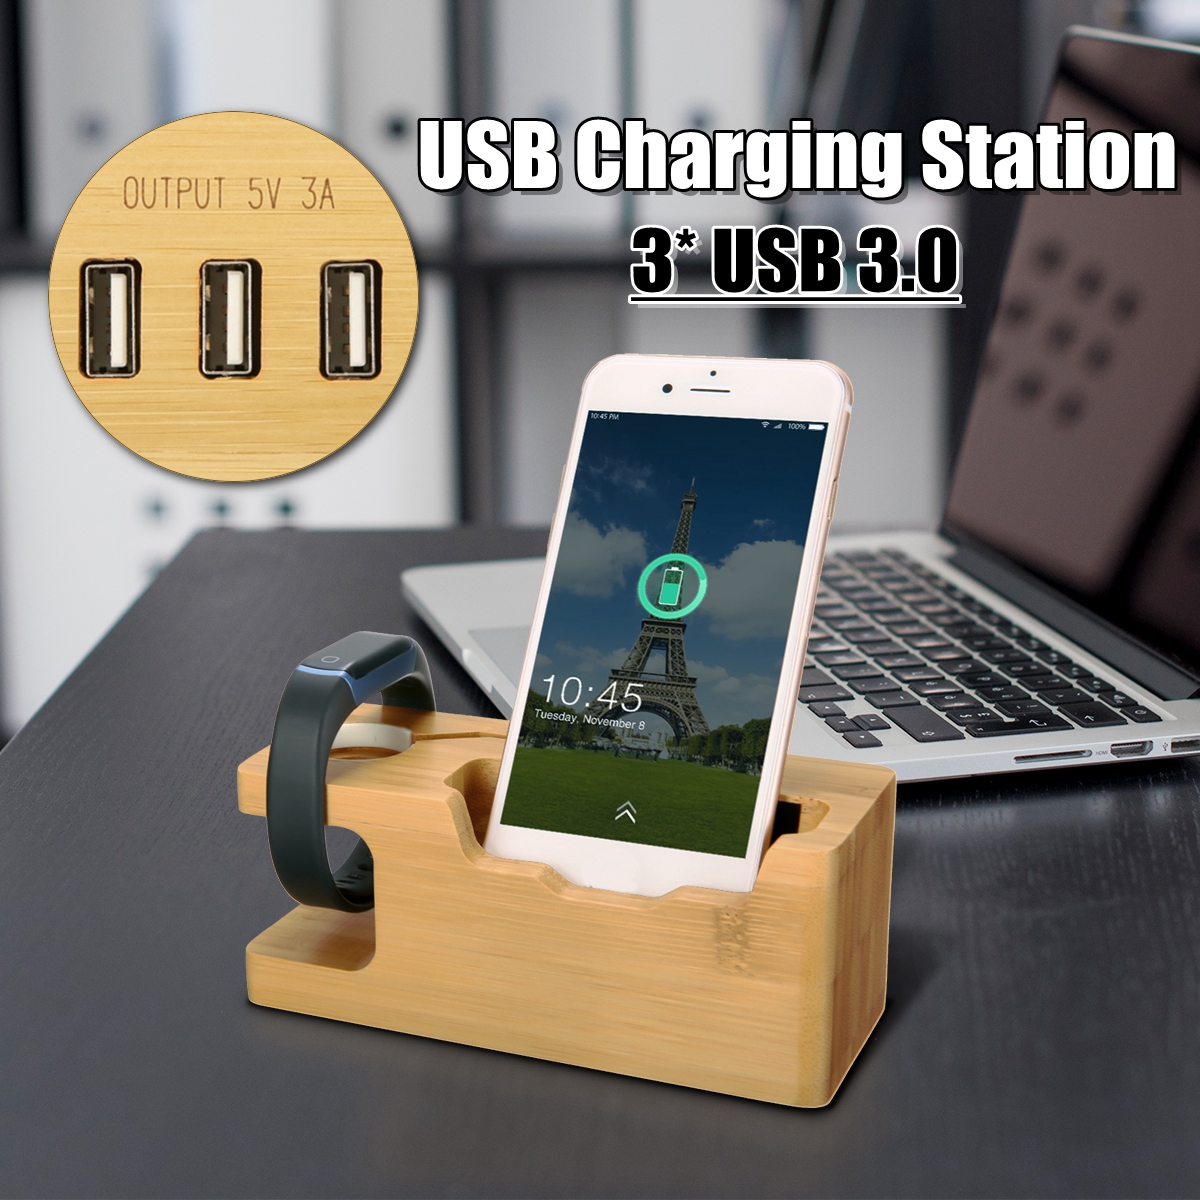 Bakeey-3USB-Charging-Station-Phone-Dock-Station-Fast-Charging-For-iPhone-XS-11Pro-MI10-Huawei-P30-P4-1720210-3